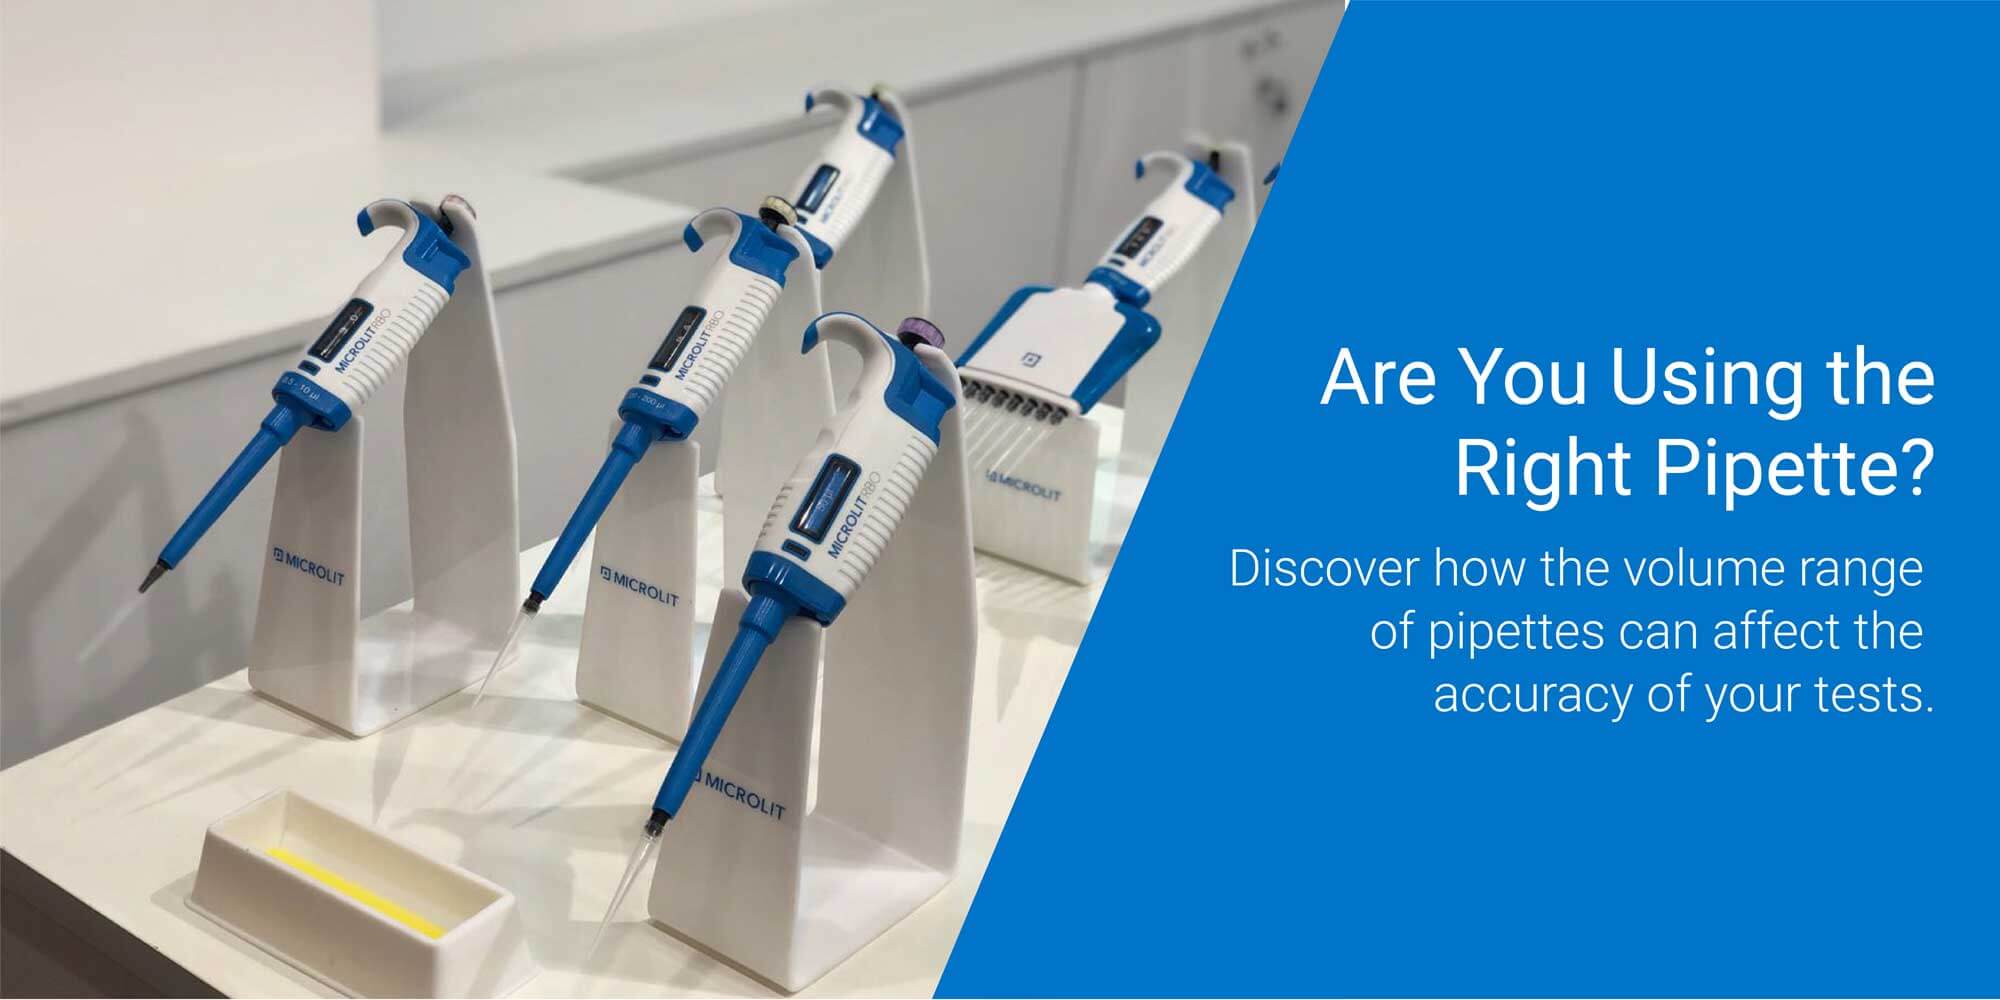 Is Your Pipette’s Volume Range Right for Your Test?